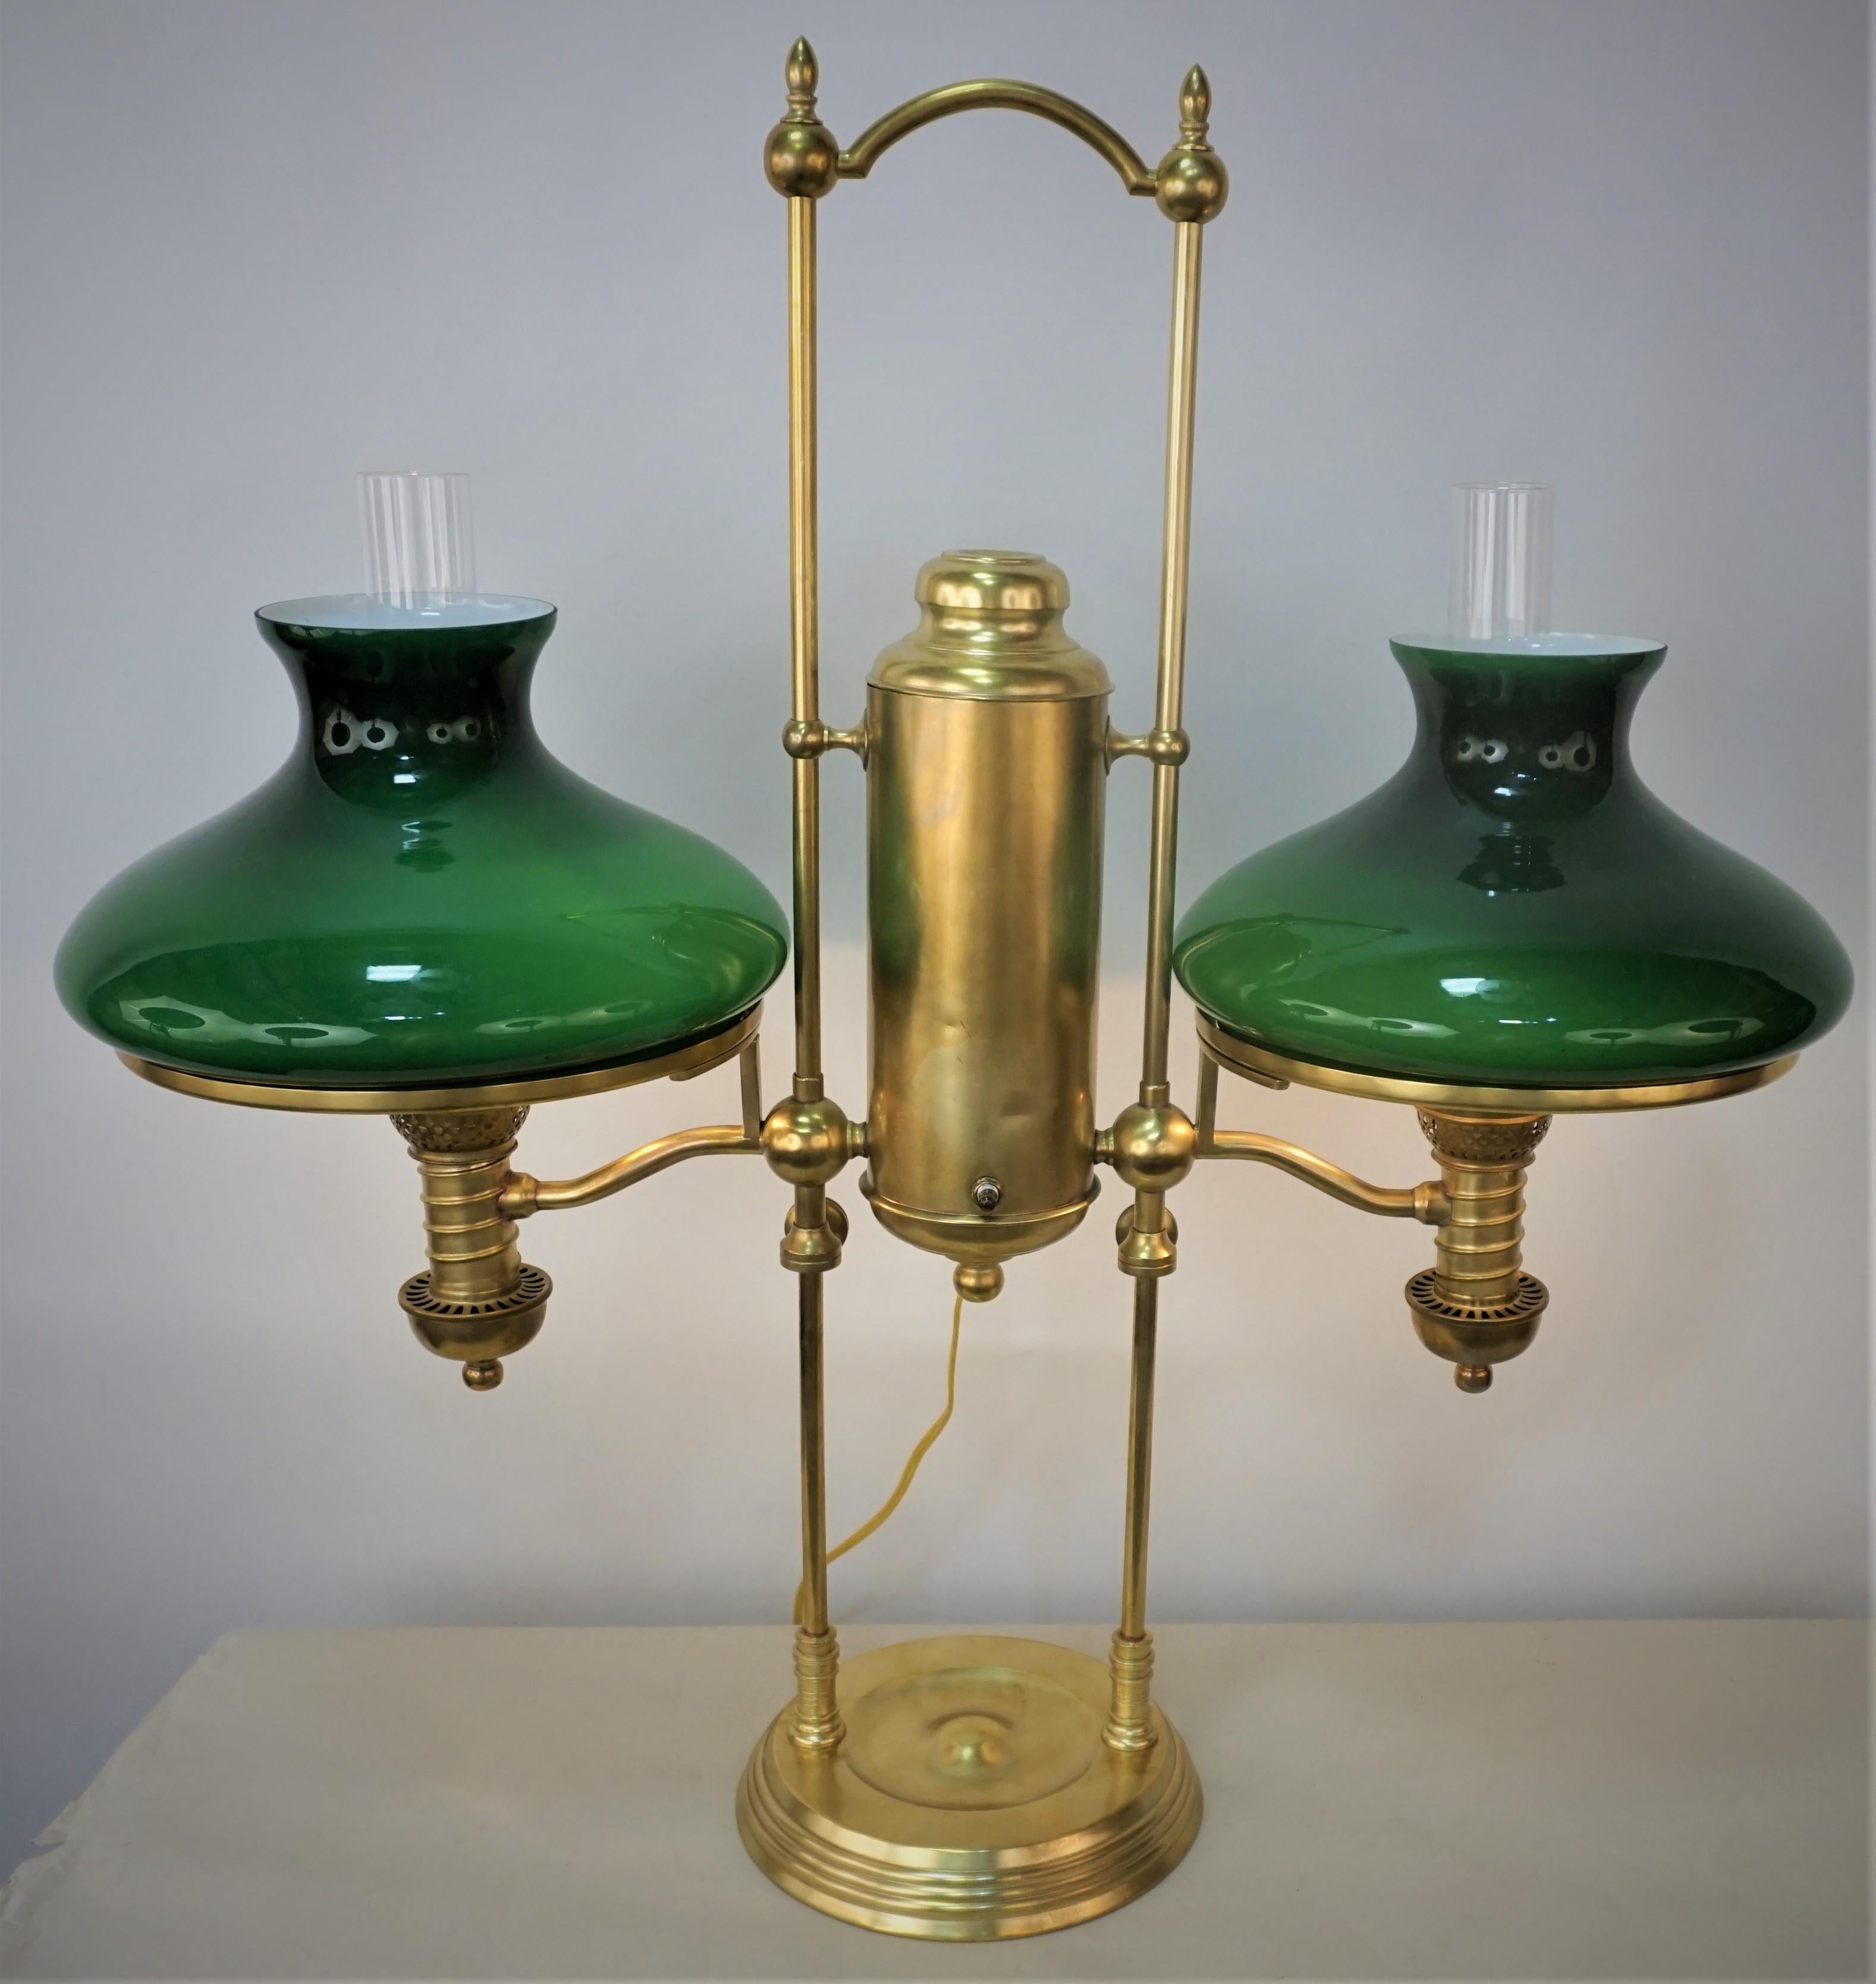 Electrified 19th American double light adjustable brass oil lamp with dark green case glass shades.